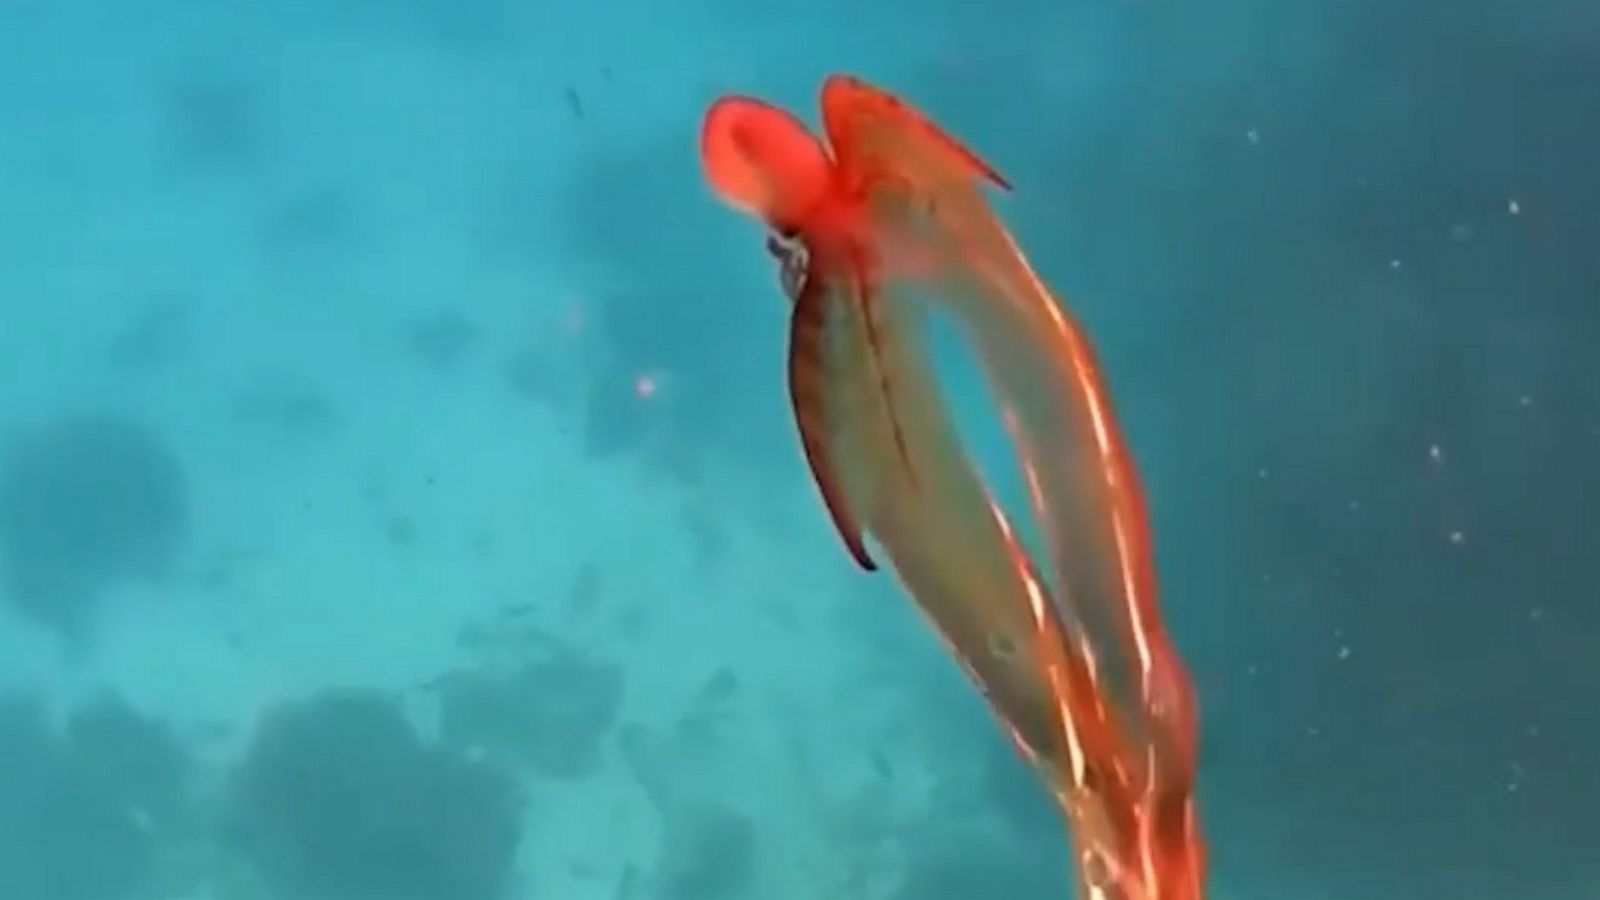 Rare blanket octopus spotted on Great Barrier Reef - Good Morning